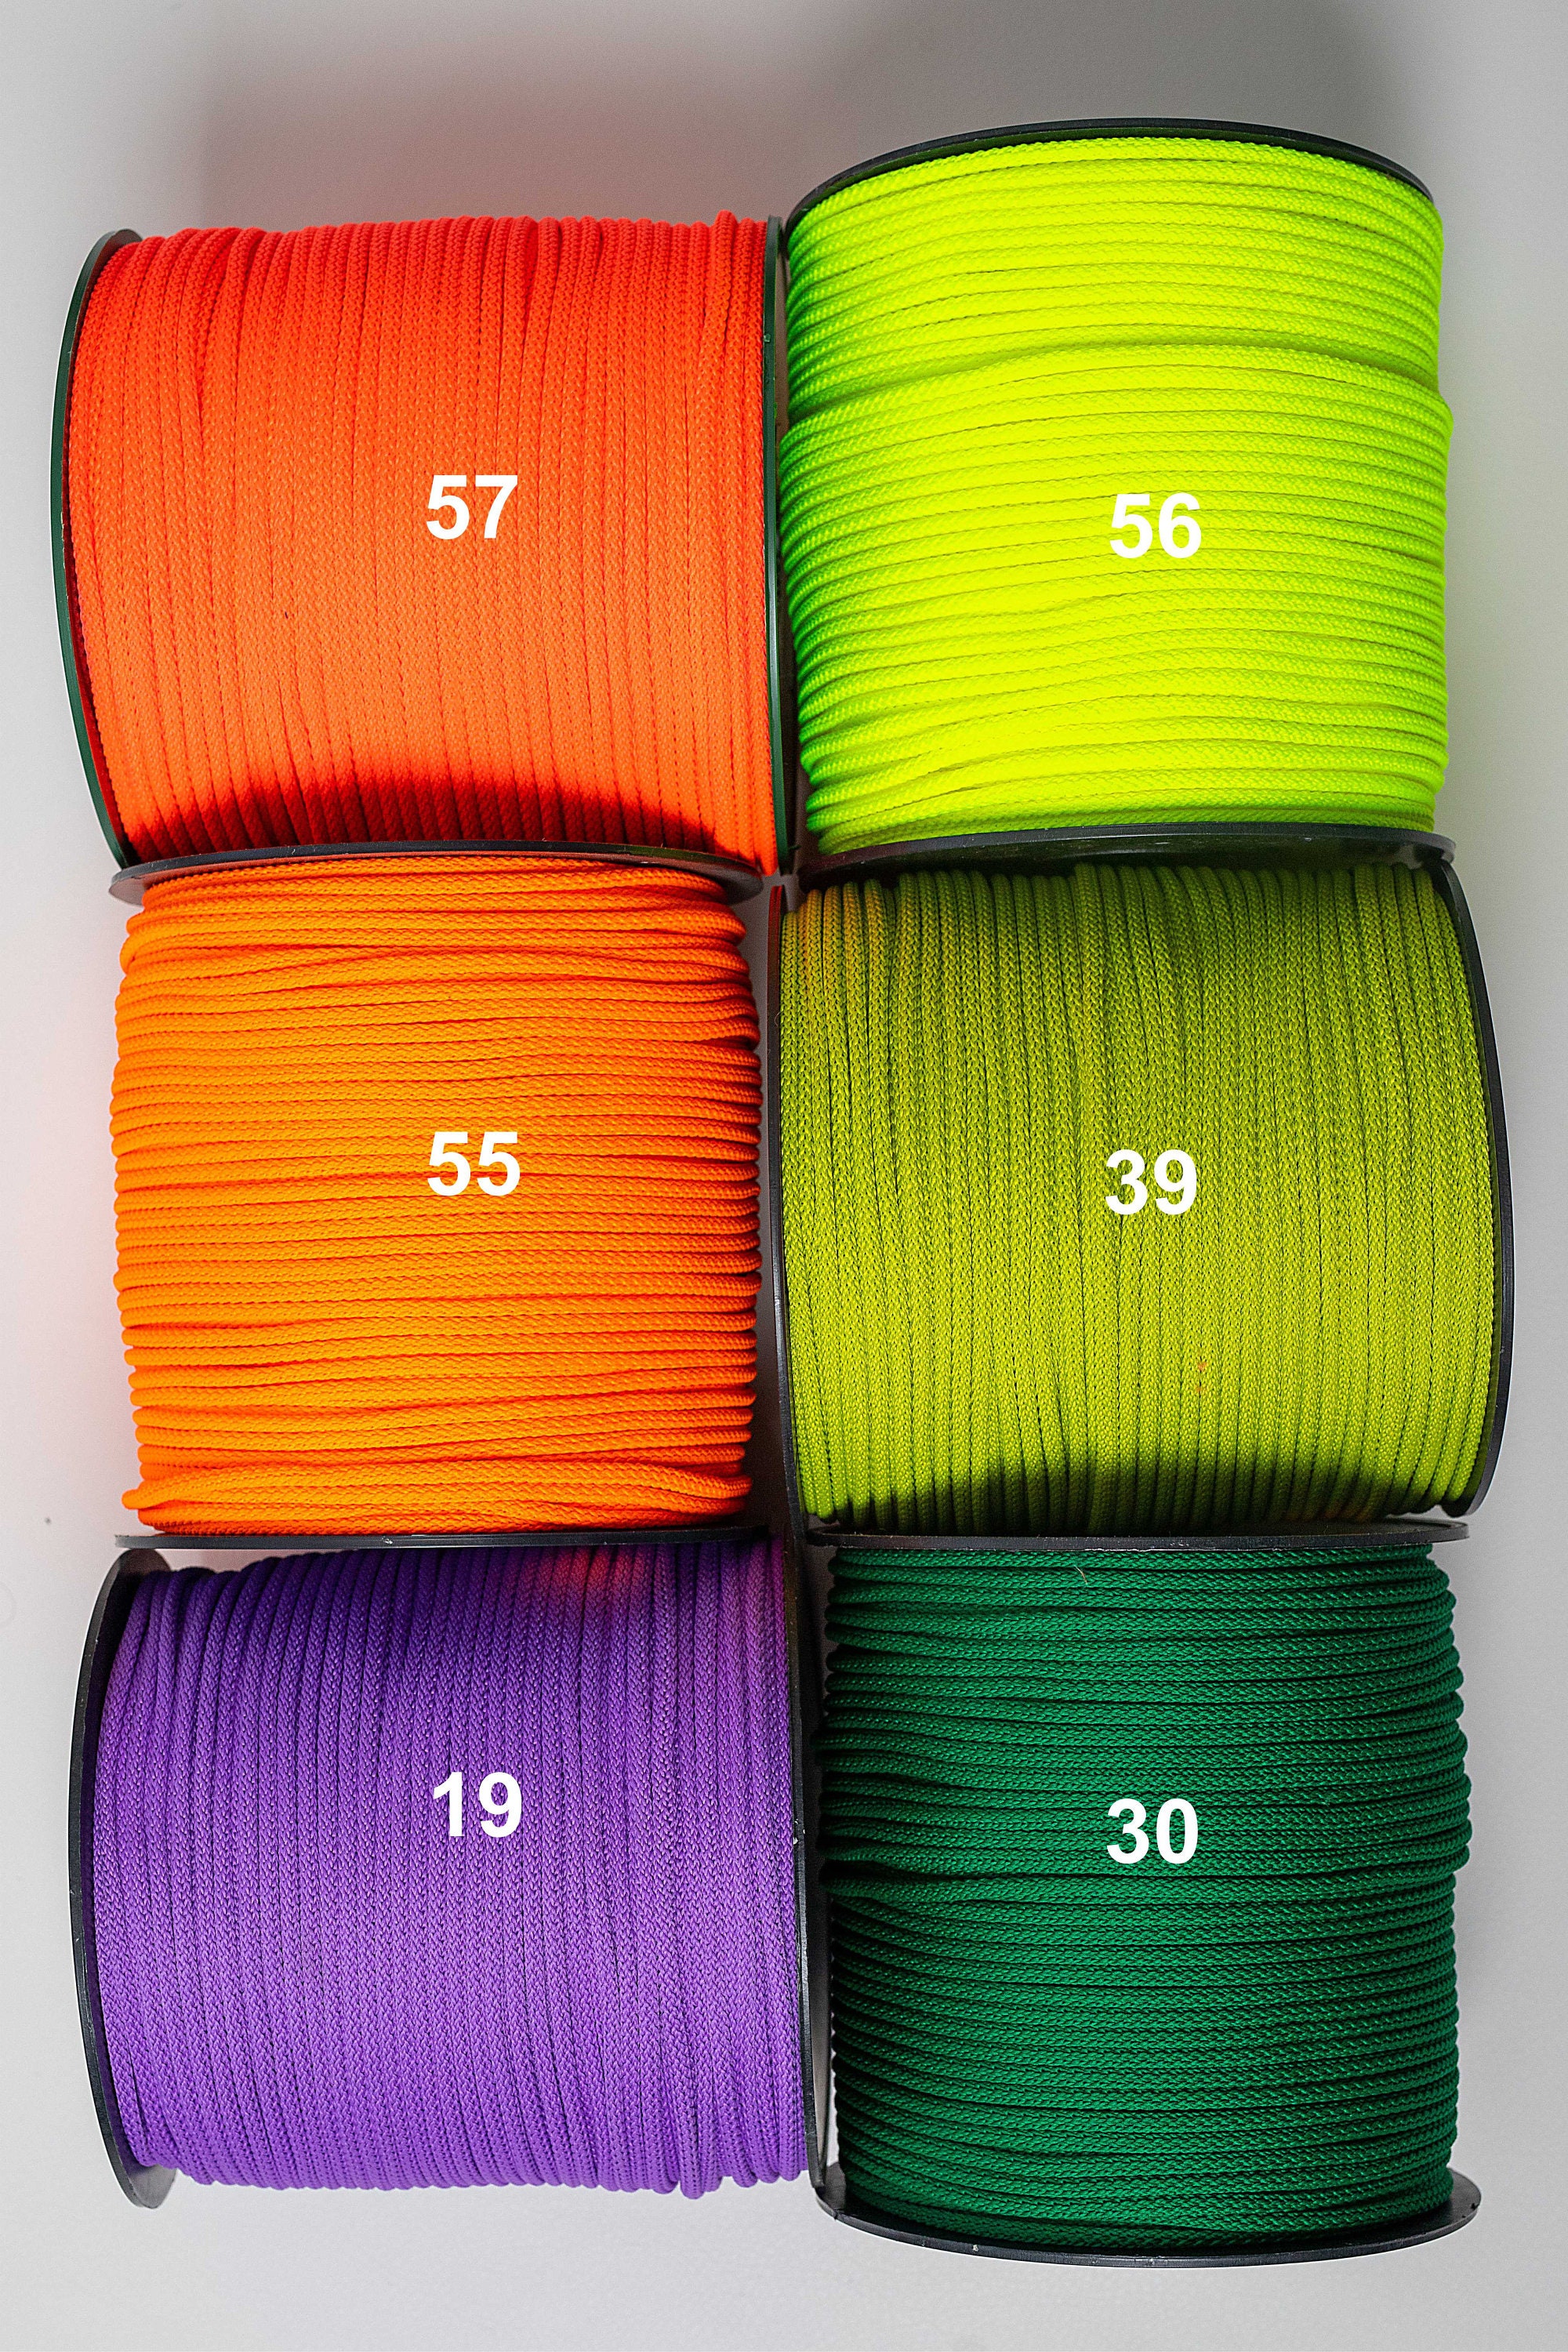 8mm Bonnie Cord 50 Yards 5 Dazzling Colors Craft Cord for Macrame,  Knitting, Crocheting, Weaving, Knotting Crafts, and More 